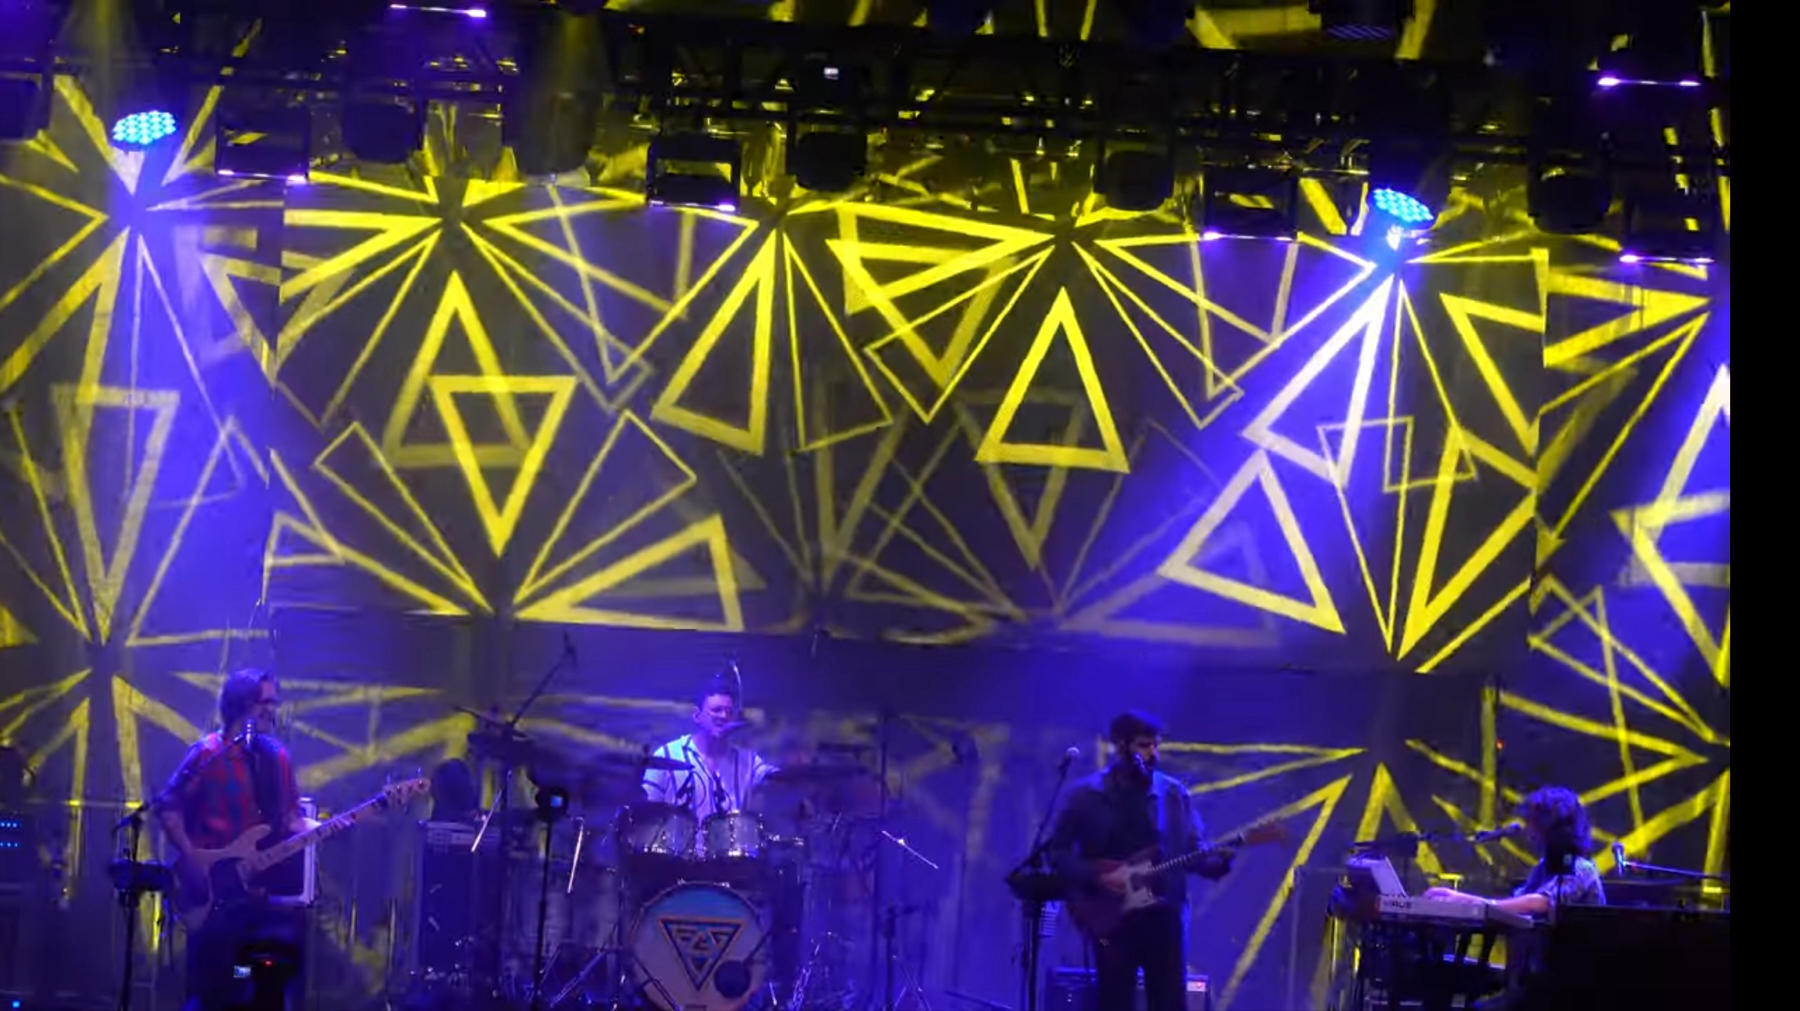 A band performing on stage with a dynamic lighting display featuring yellow geometric patterns in the background.